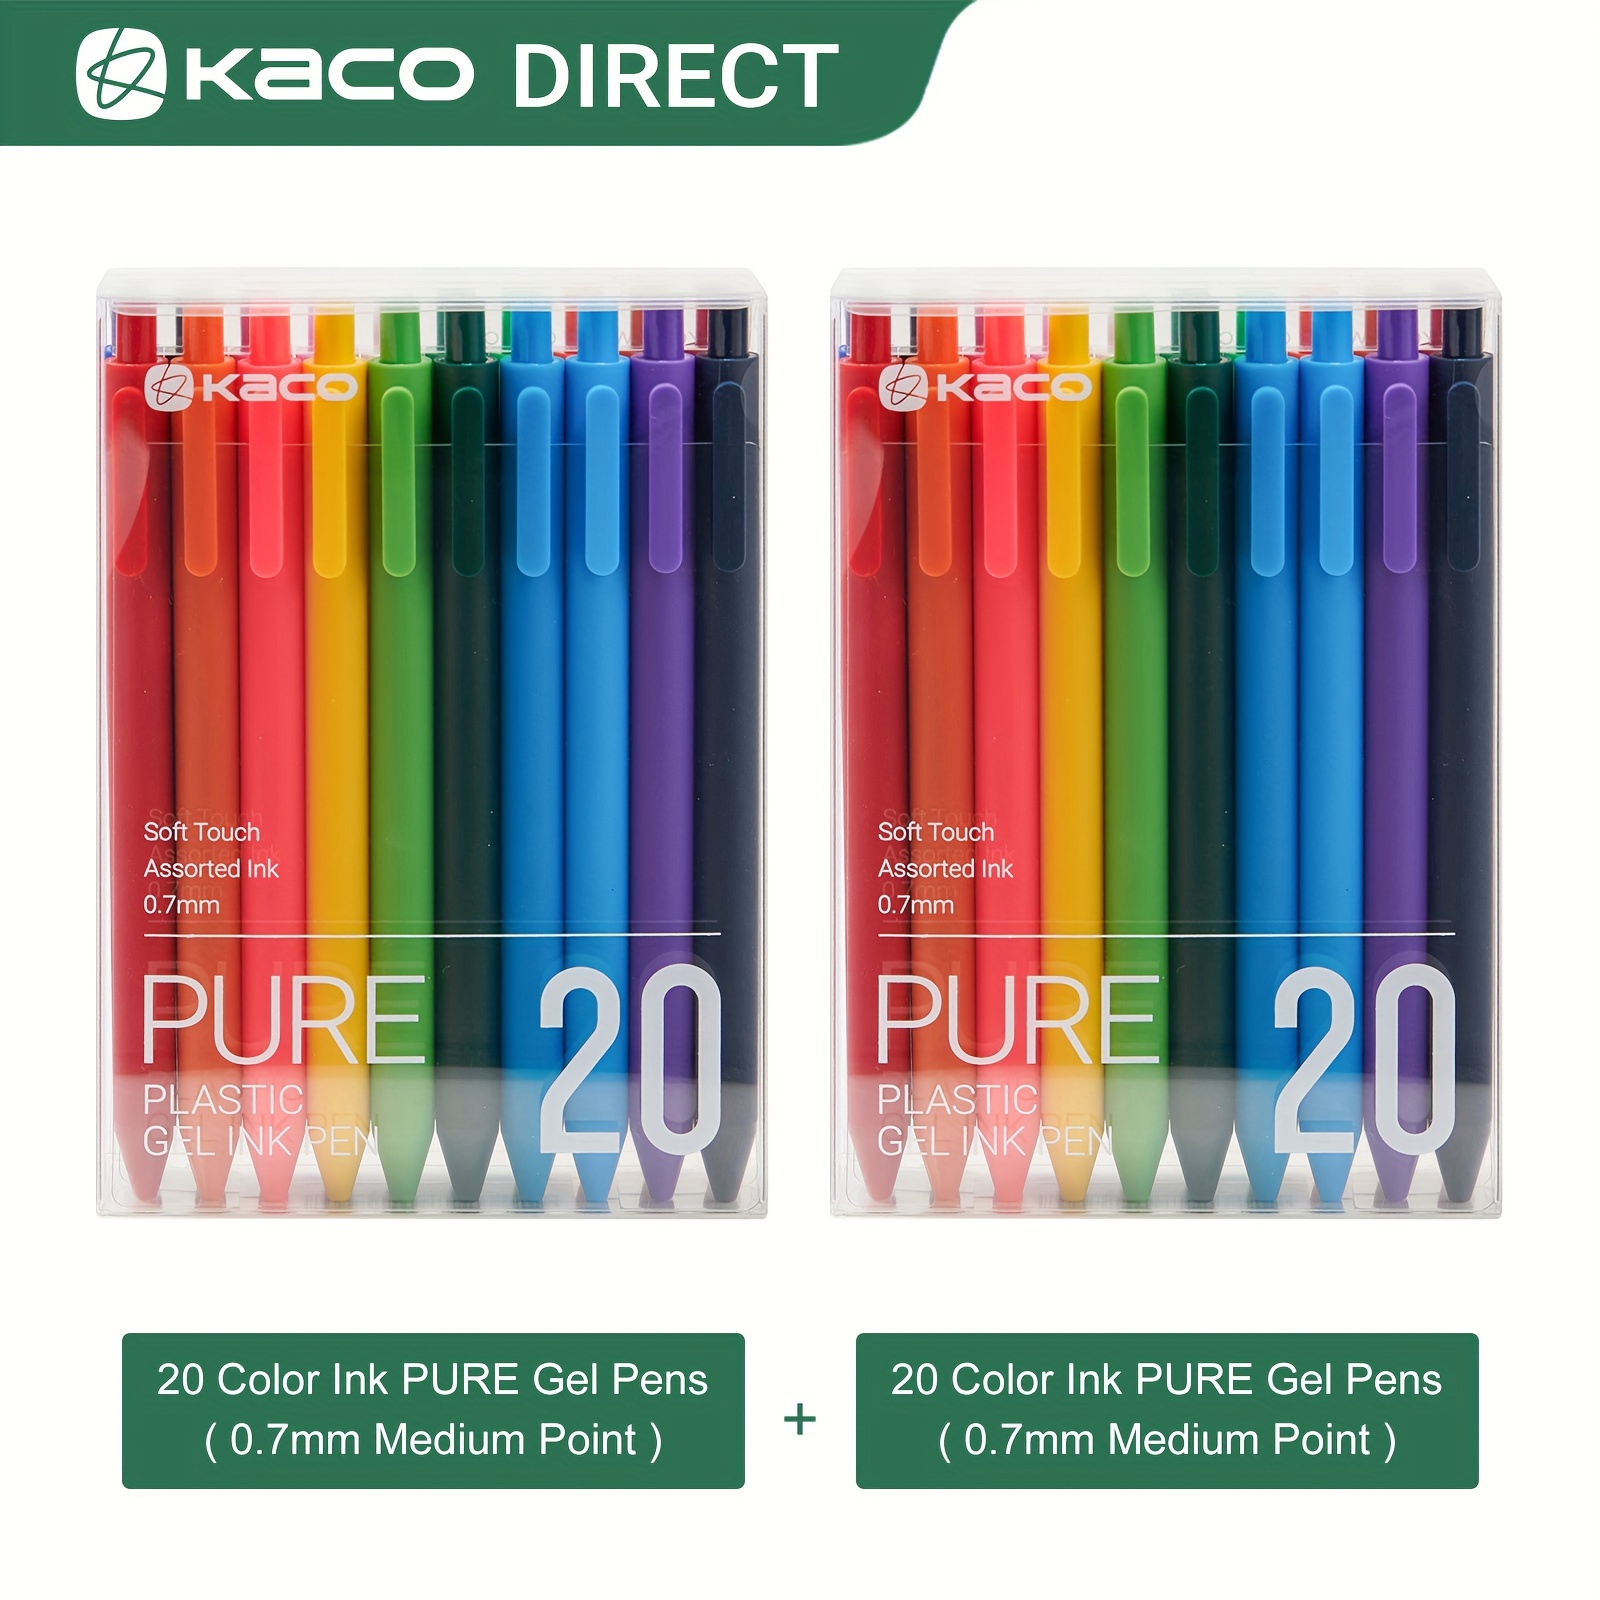 

Kaco Pure Gel Pens Color Ink 40 Pieces (2 Pet Boxes Included), Assorted 0.7mm, Medium Point, Aesthetic Cute Stationery Pens For Journaling Note Taking Pens Shcool Office Supplies